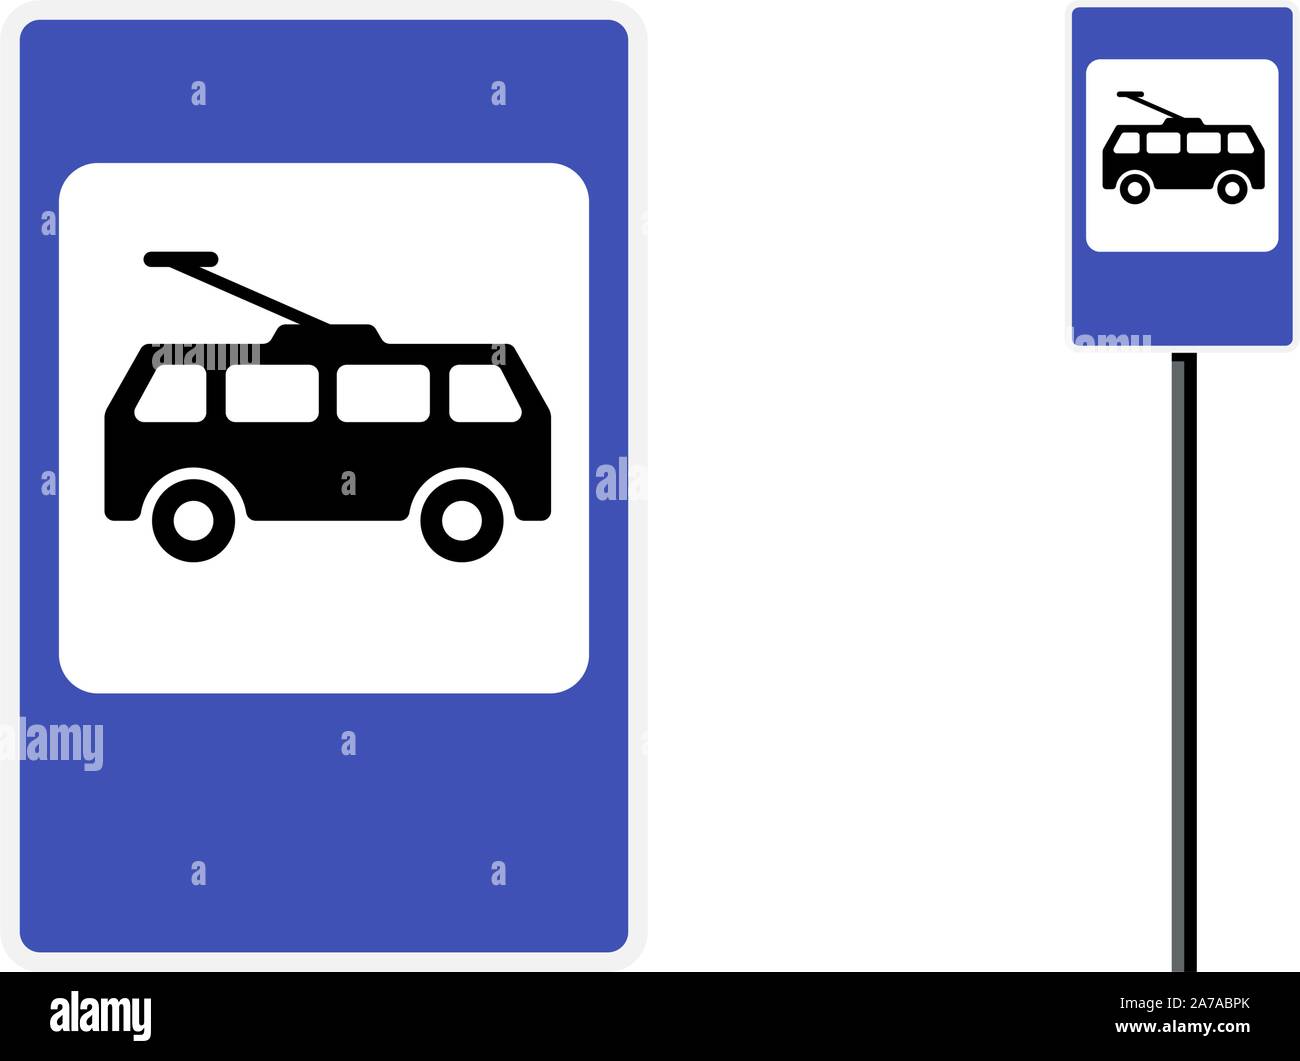 Trolley bus stop post station icon flat design. Blue city road public transport sign set. Electric trolleybus isolated vector symbol illustration on white background Stock Vector